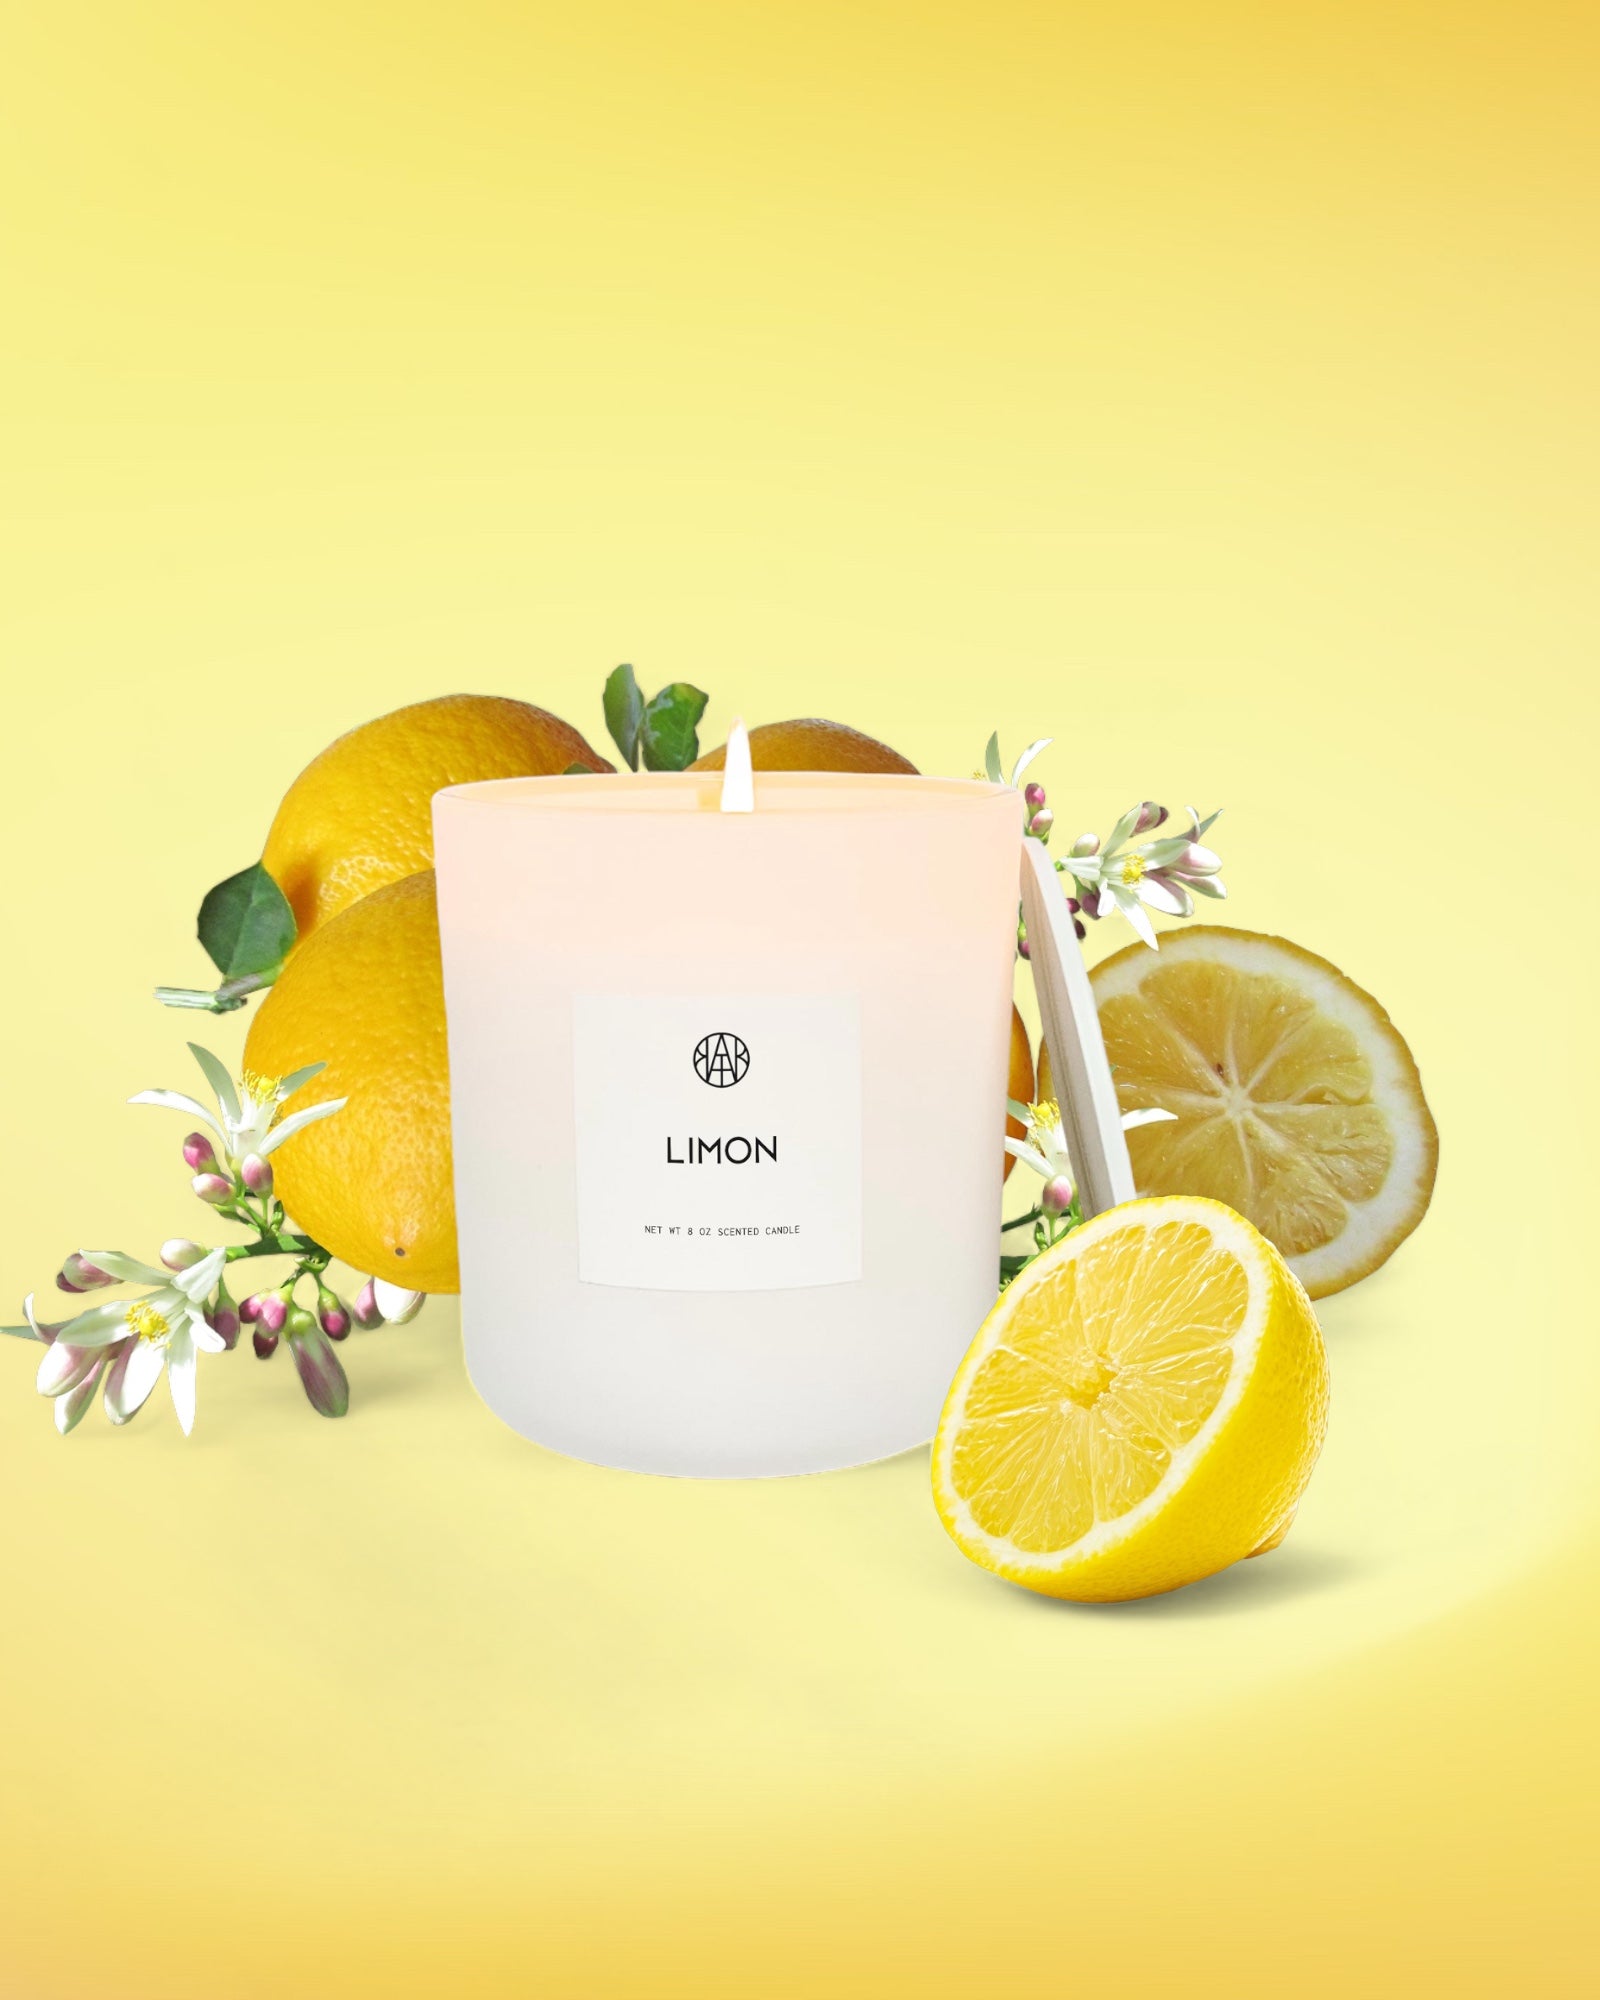 LIMON - Classic Candle - AEMBR - Clean Luxury Candles, Wax Melts & Laundry Care